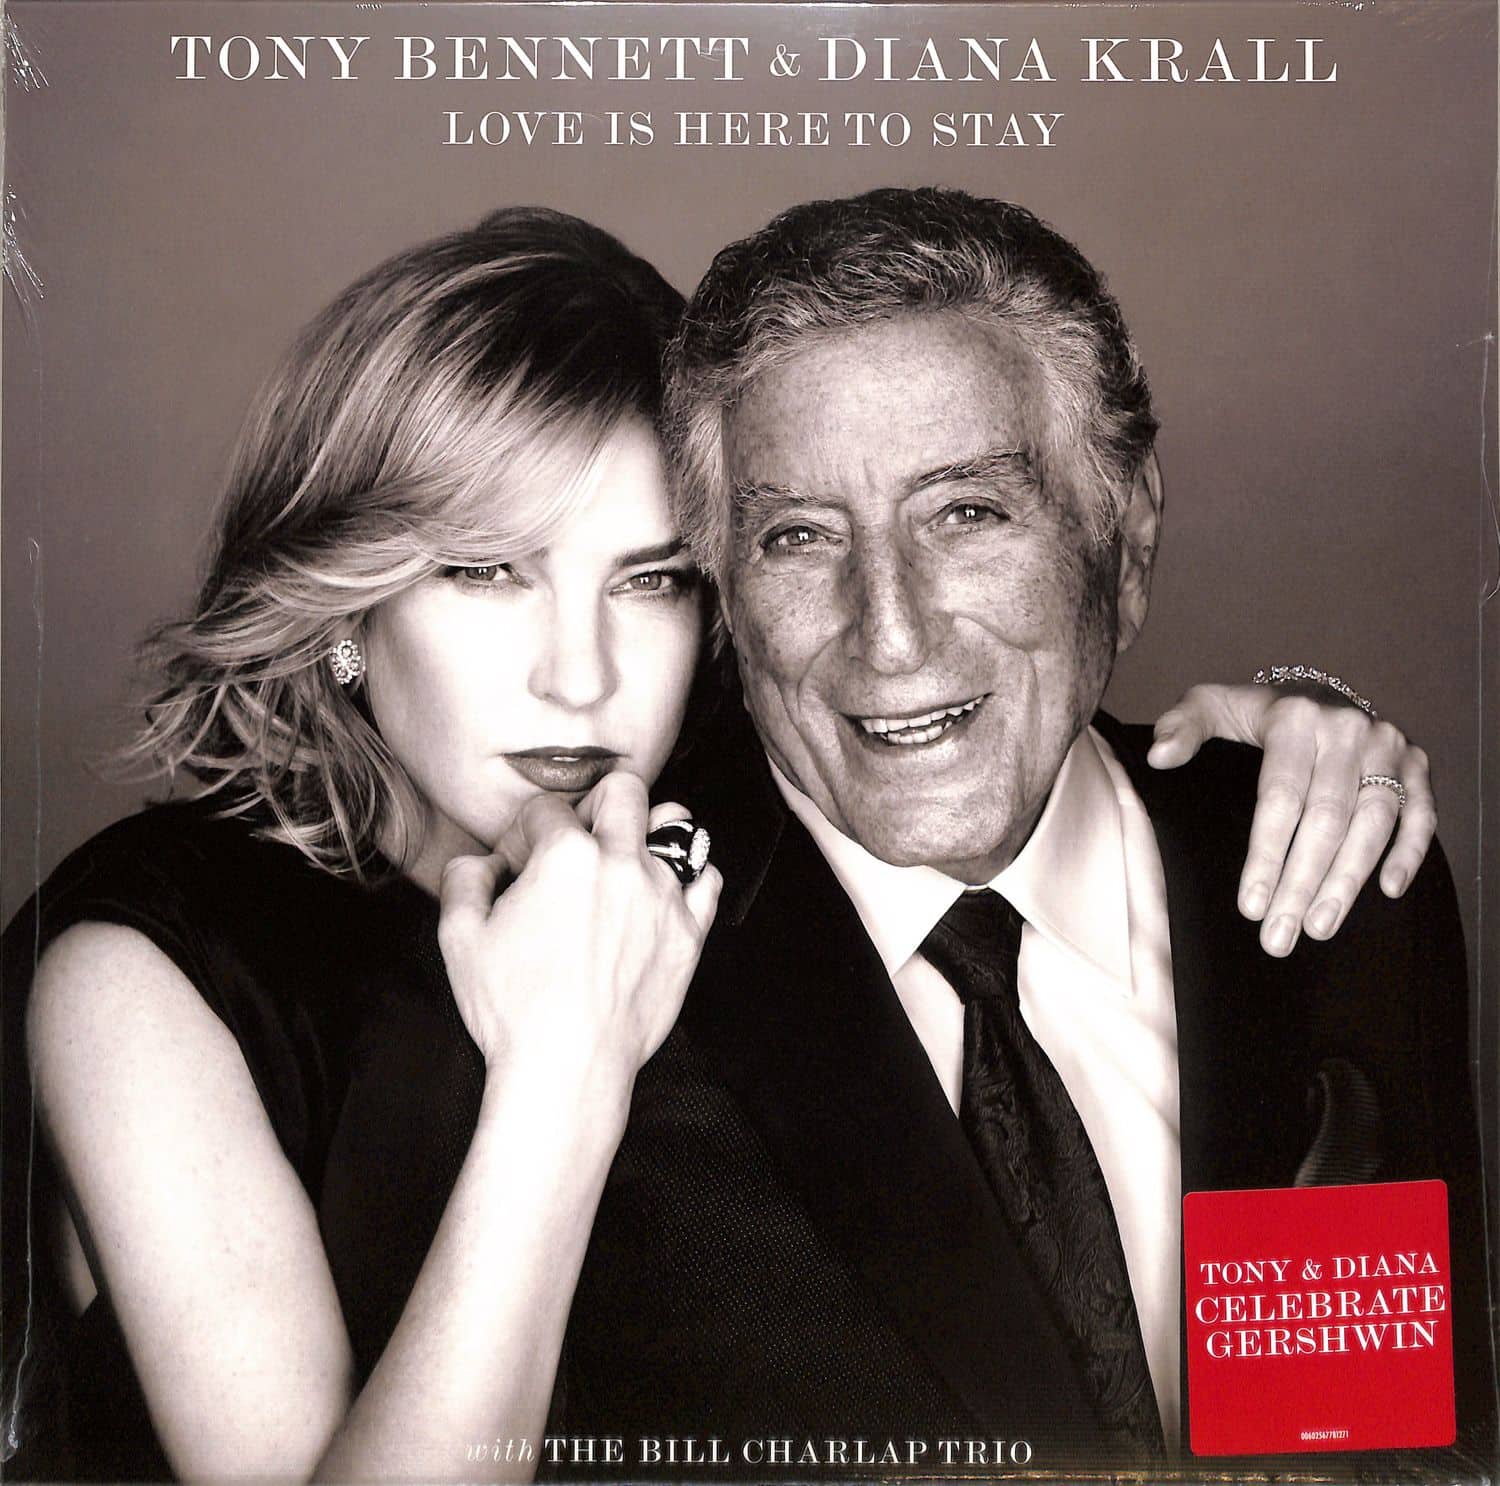 Tony Bennett & Diana Krall - LOVE IS HERE TO STAY 